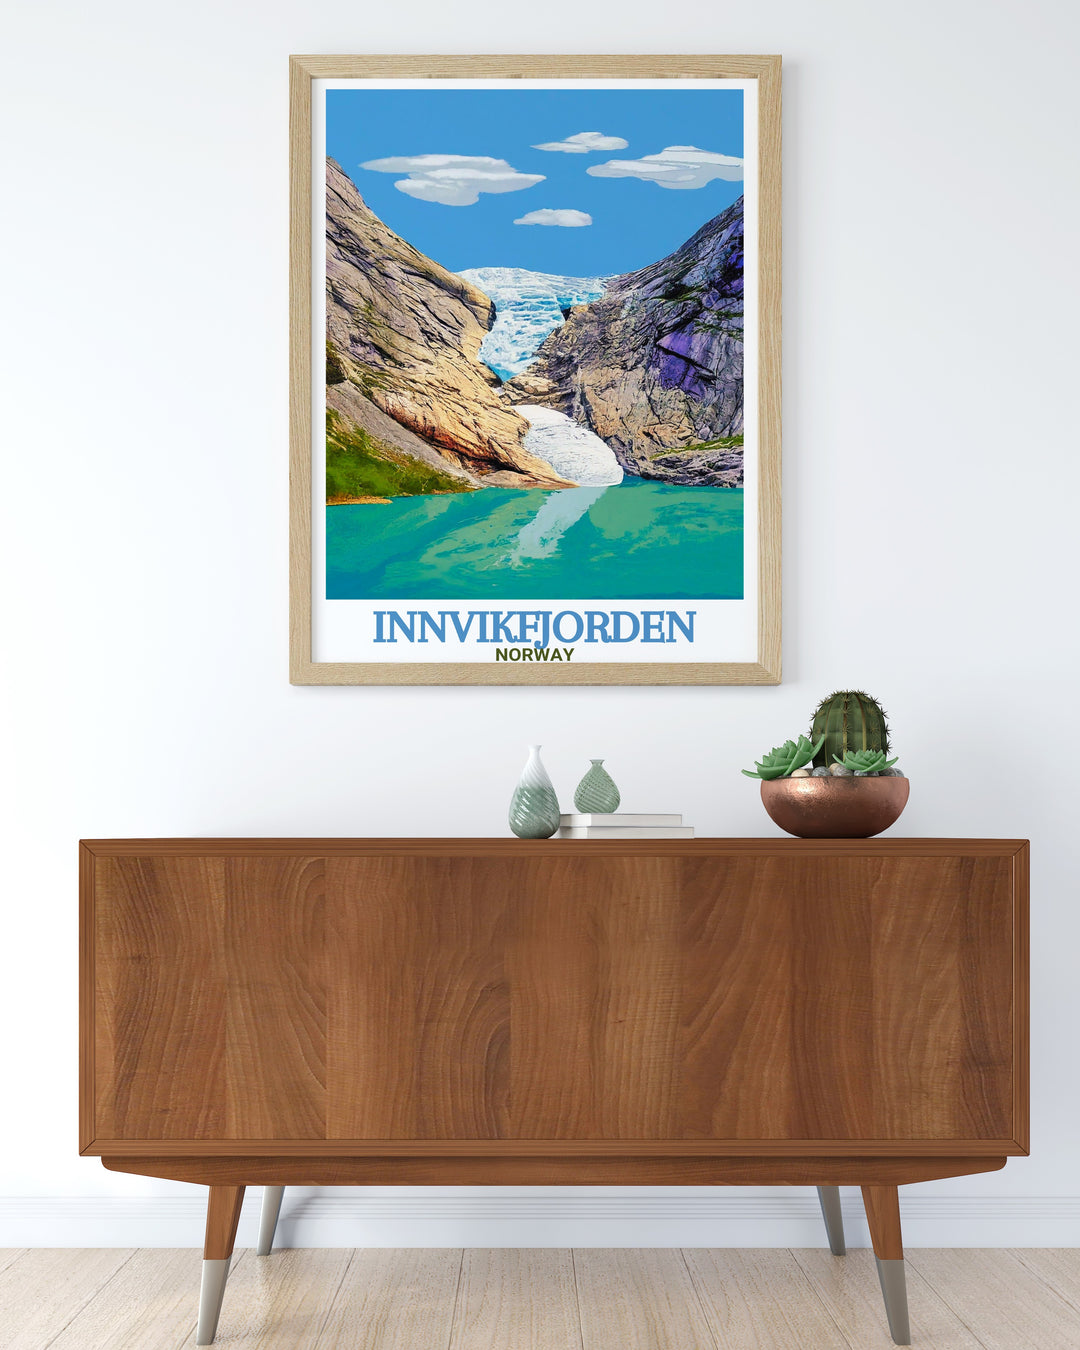 Exquisite Briksdalsbreen Glacier travel poster illustrating the stunning fjord scenery and tranquil waters of Norwegian Fjords ideal for art enthusiasts